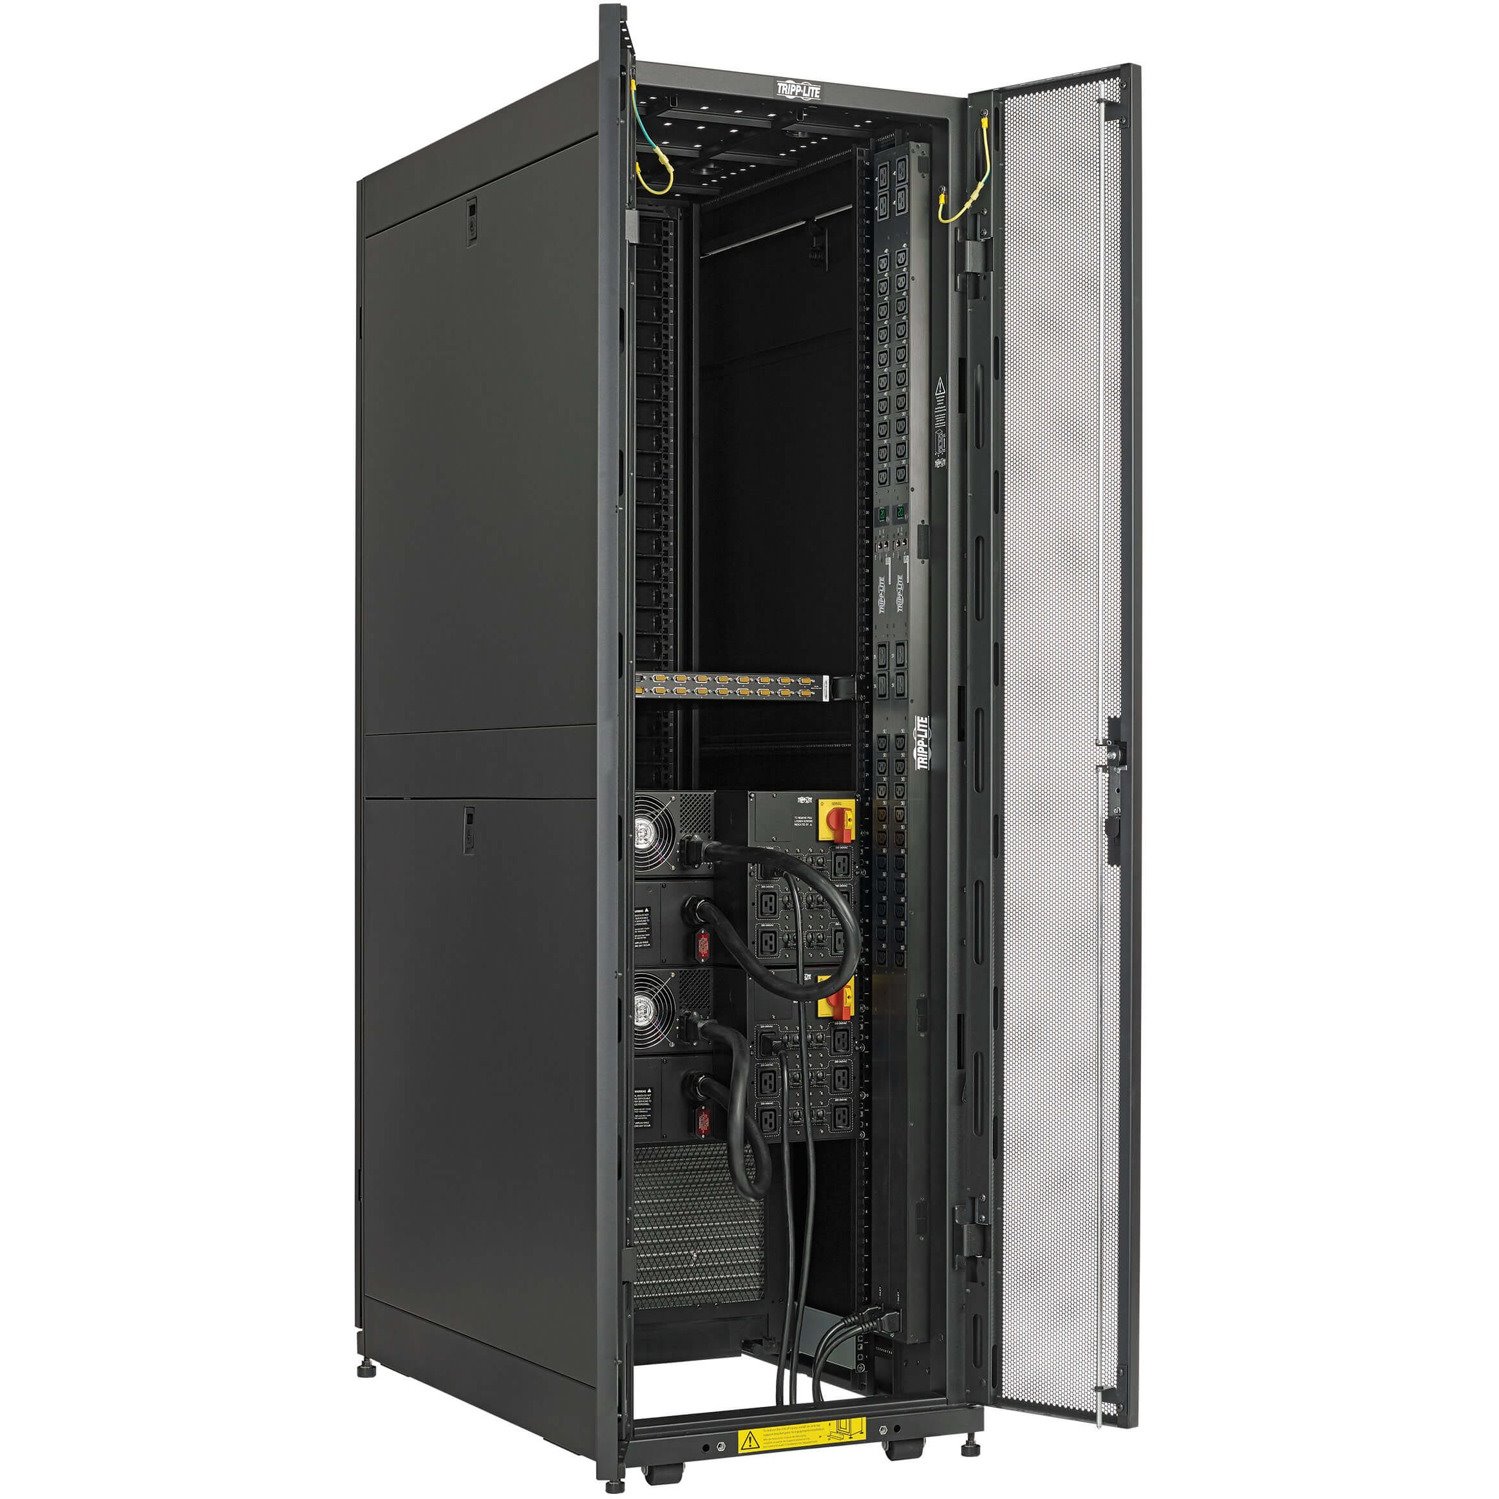 Tripp Lite by Eaton EdgeReady&trade; Micro Data Center - 30U, (2) 10 kVA UPS Systems (N+N), Network Management and Dual PDUs, 208/240V or 230V Assembled/Tested Unit